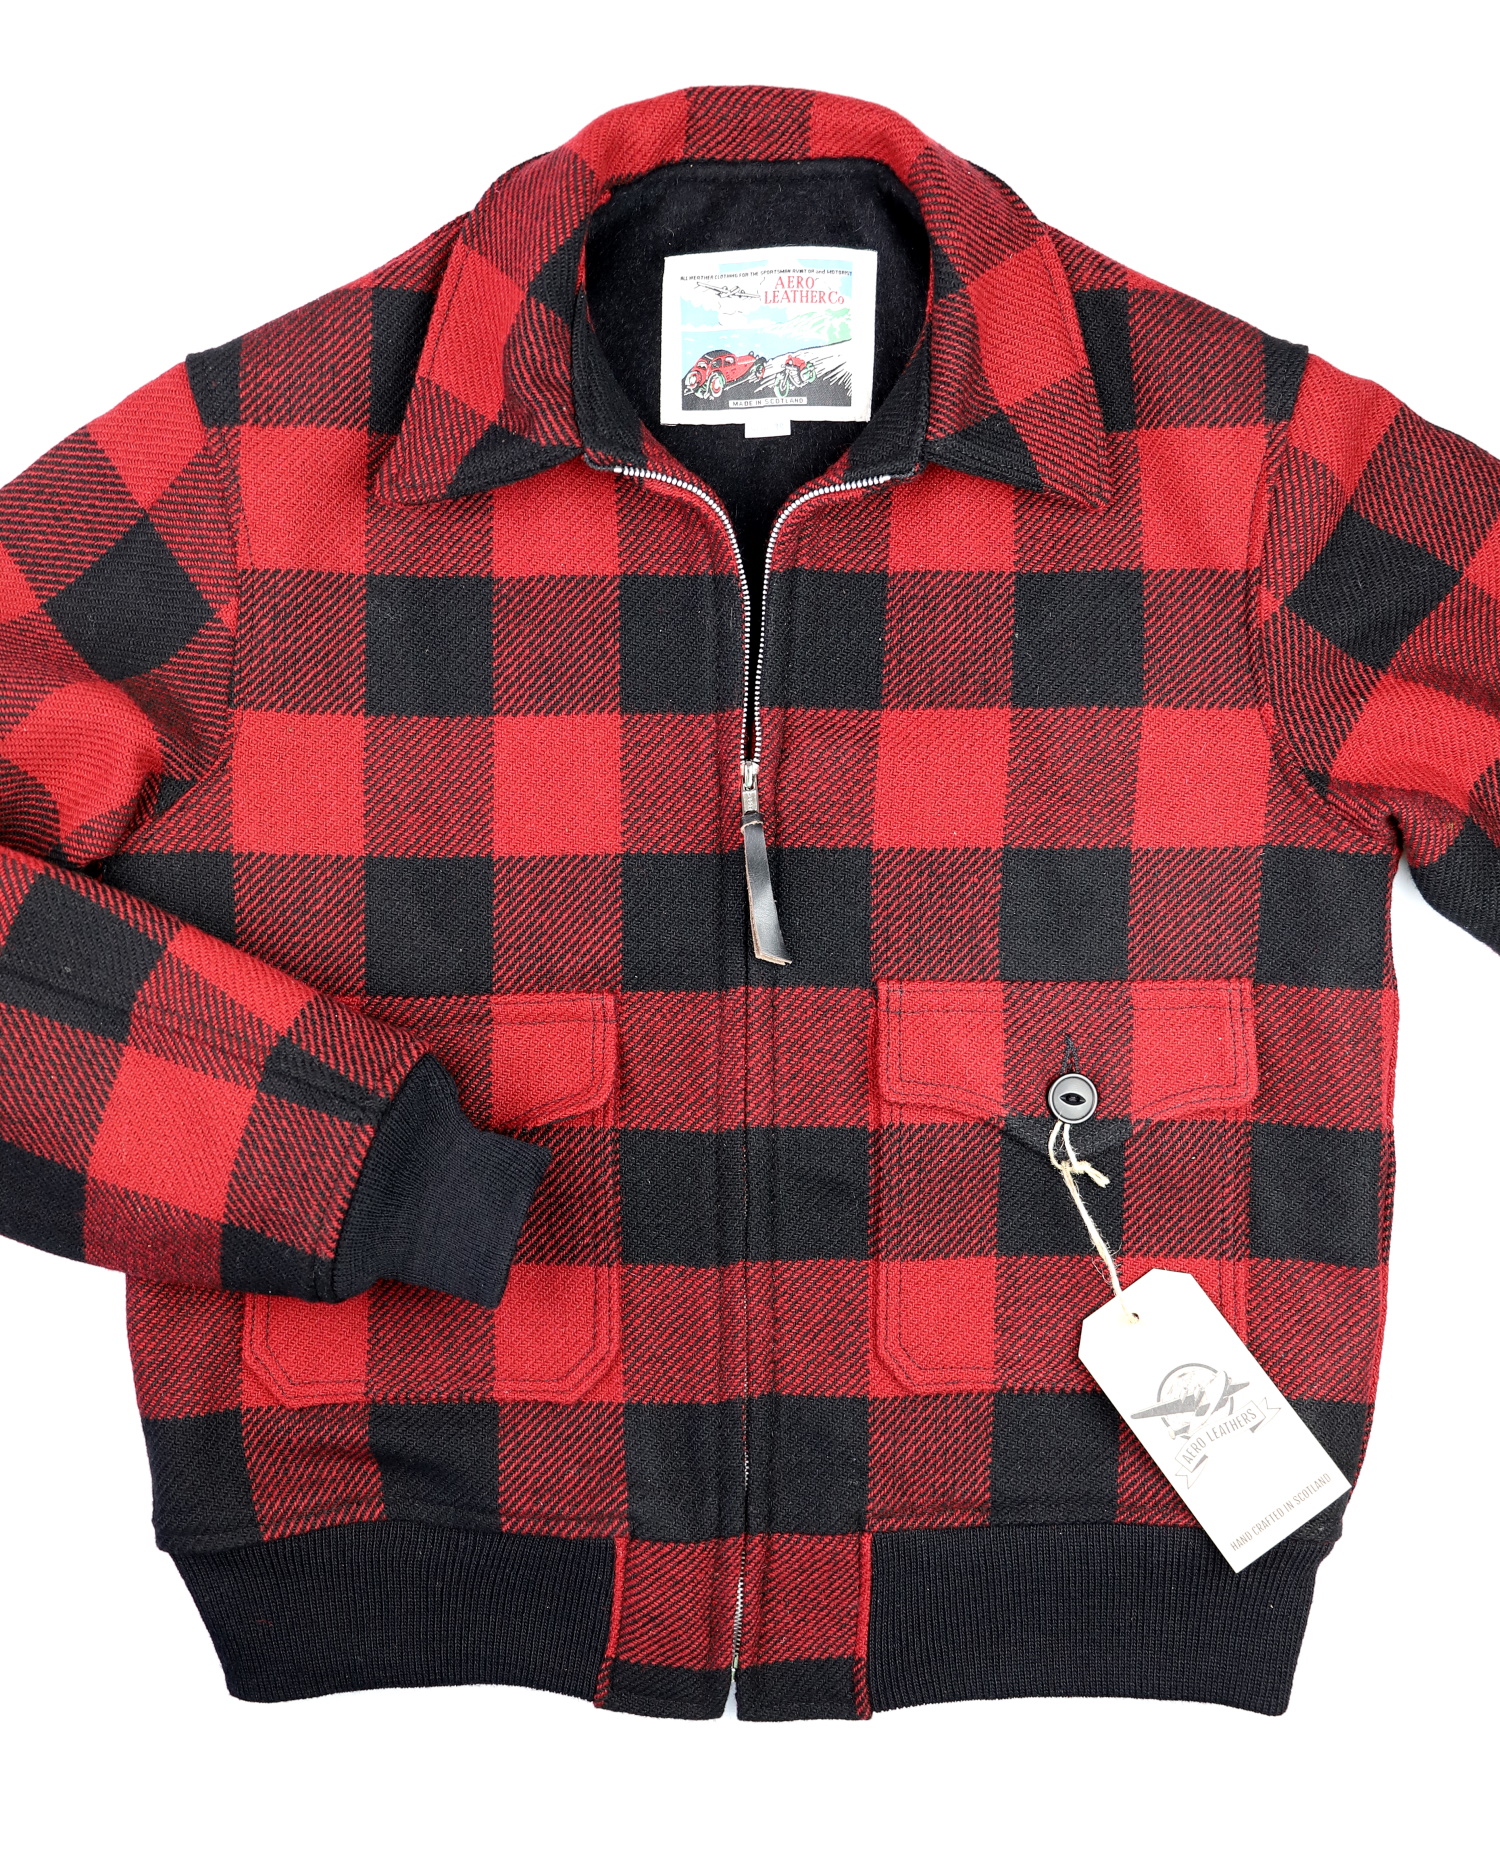 Aero Waterfront Red and Black Wool JE9 front.jpg